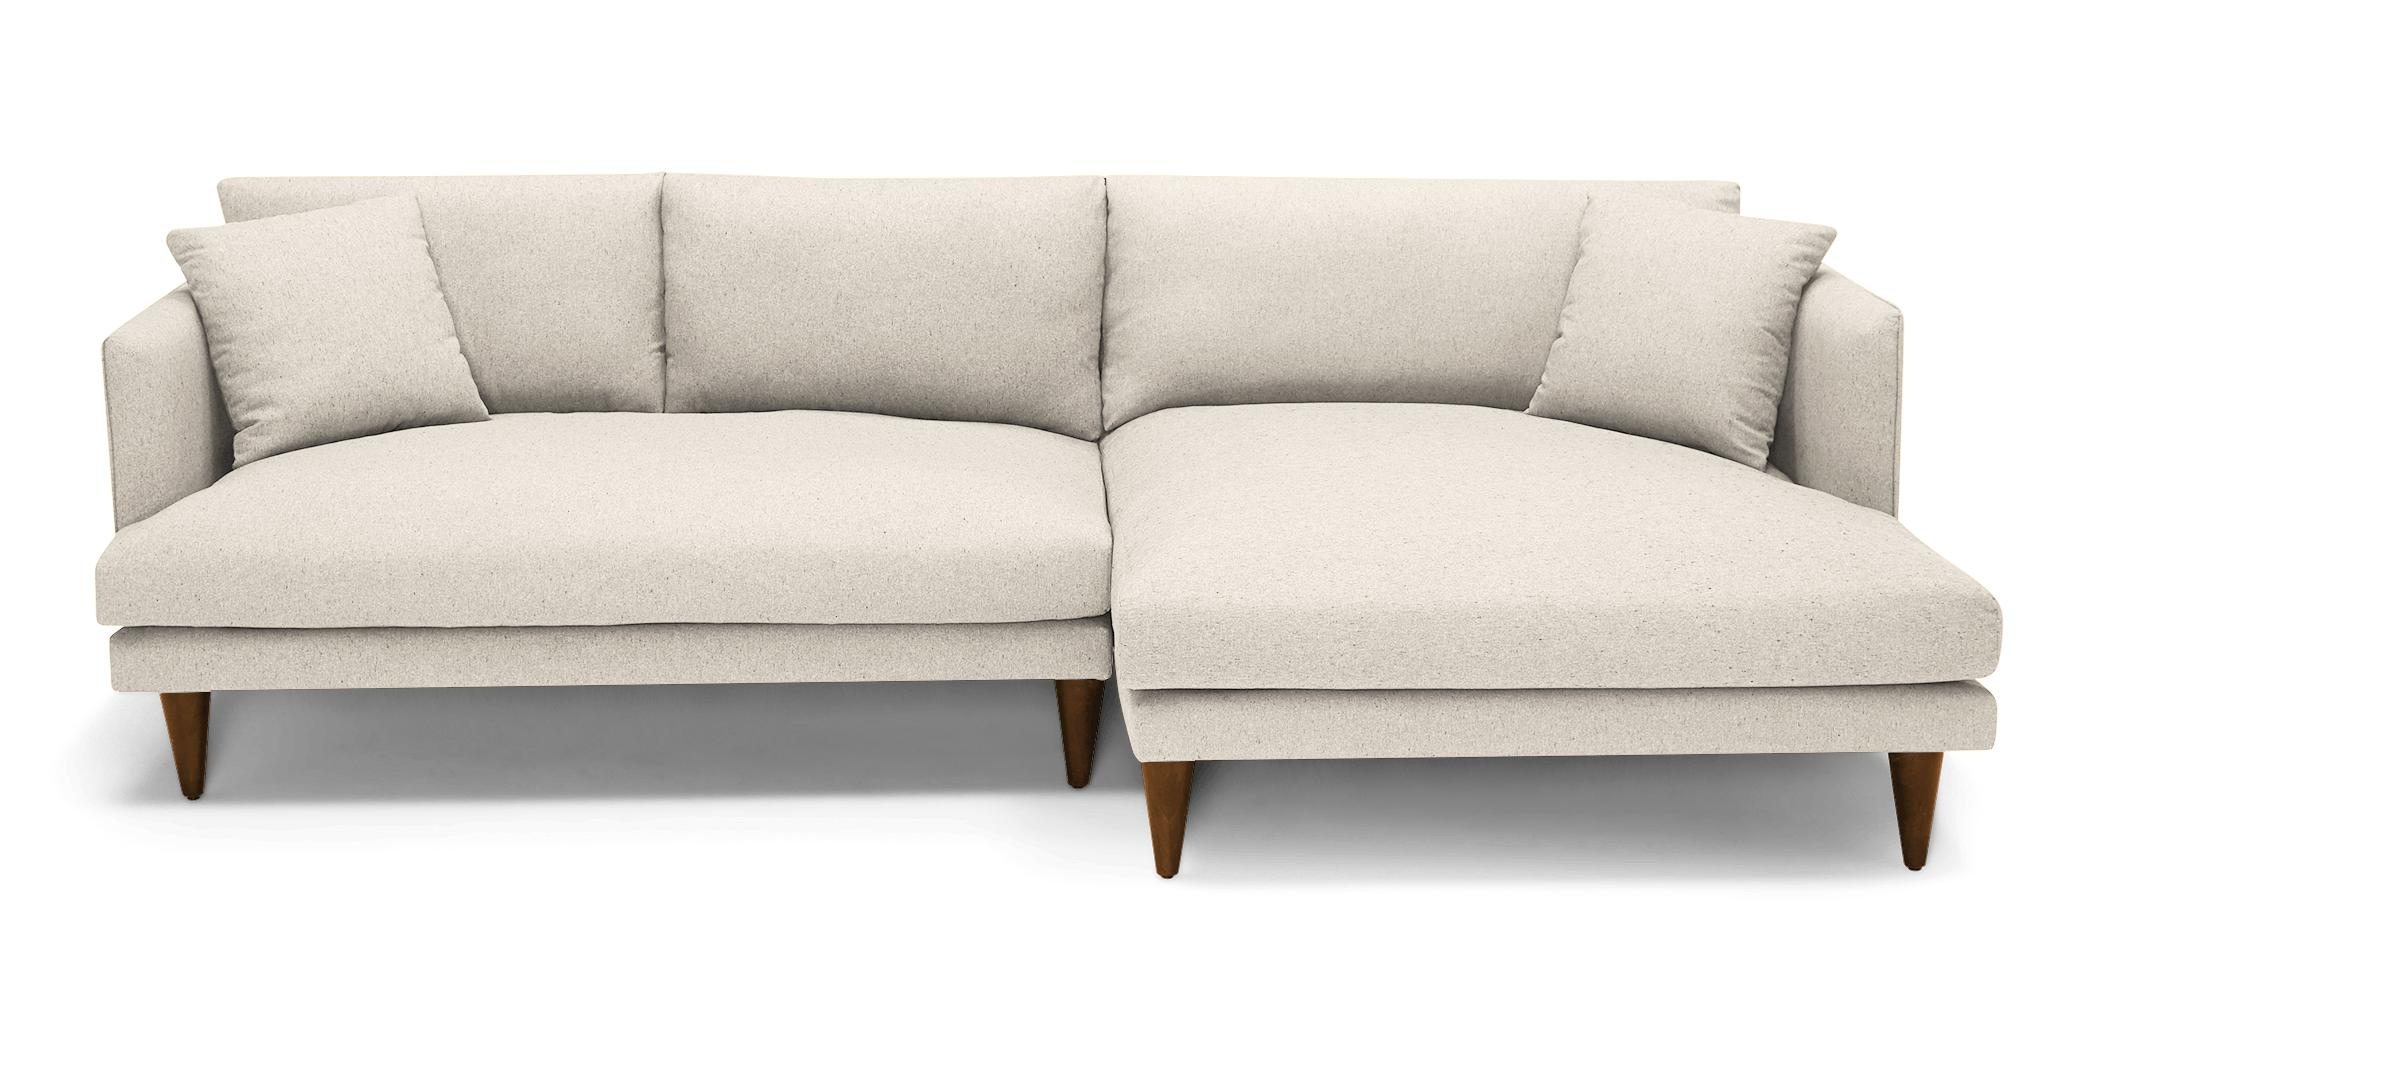 Beige/White Lewis Mid Century Modern Sectional - Cody Sandstone - Mocha - Right - Cone - Image 1